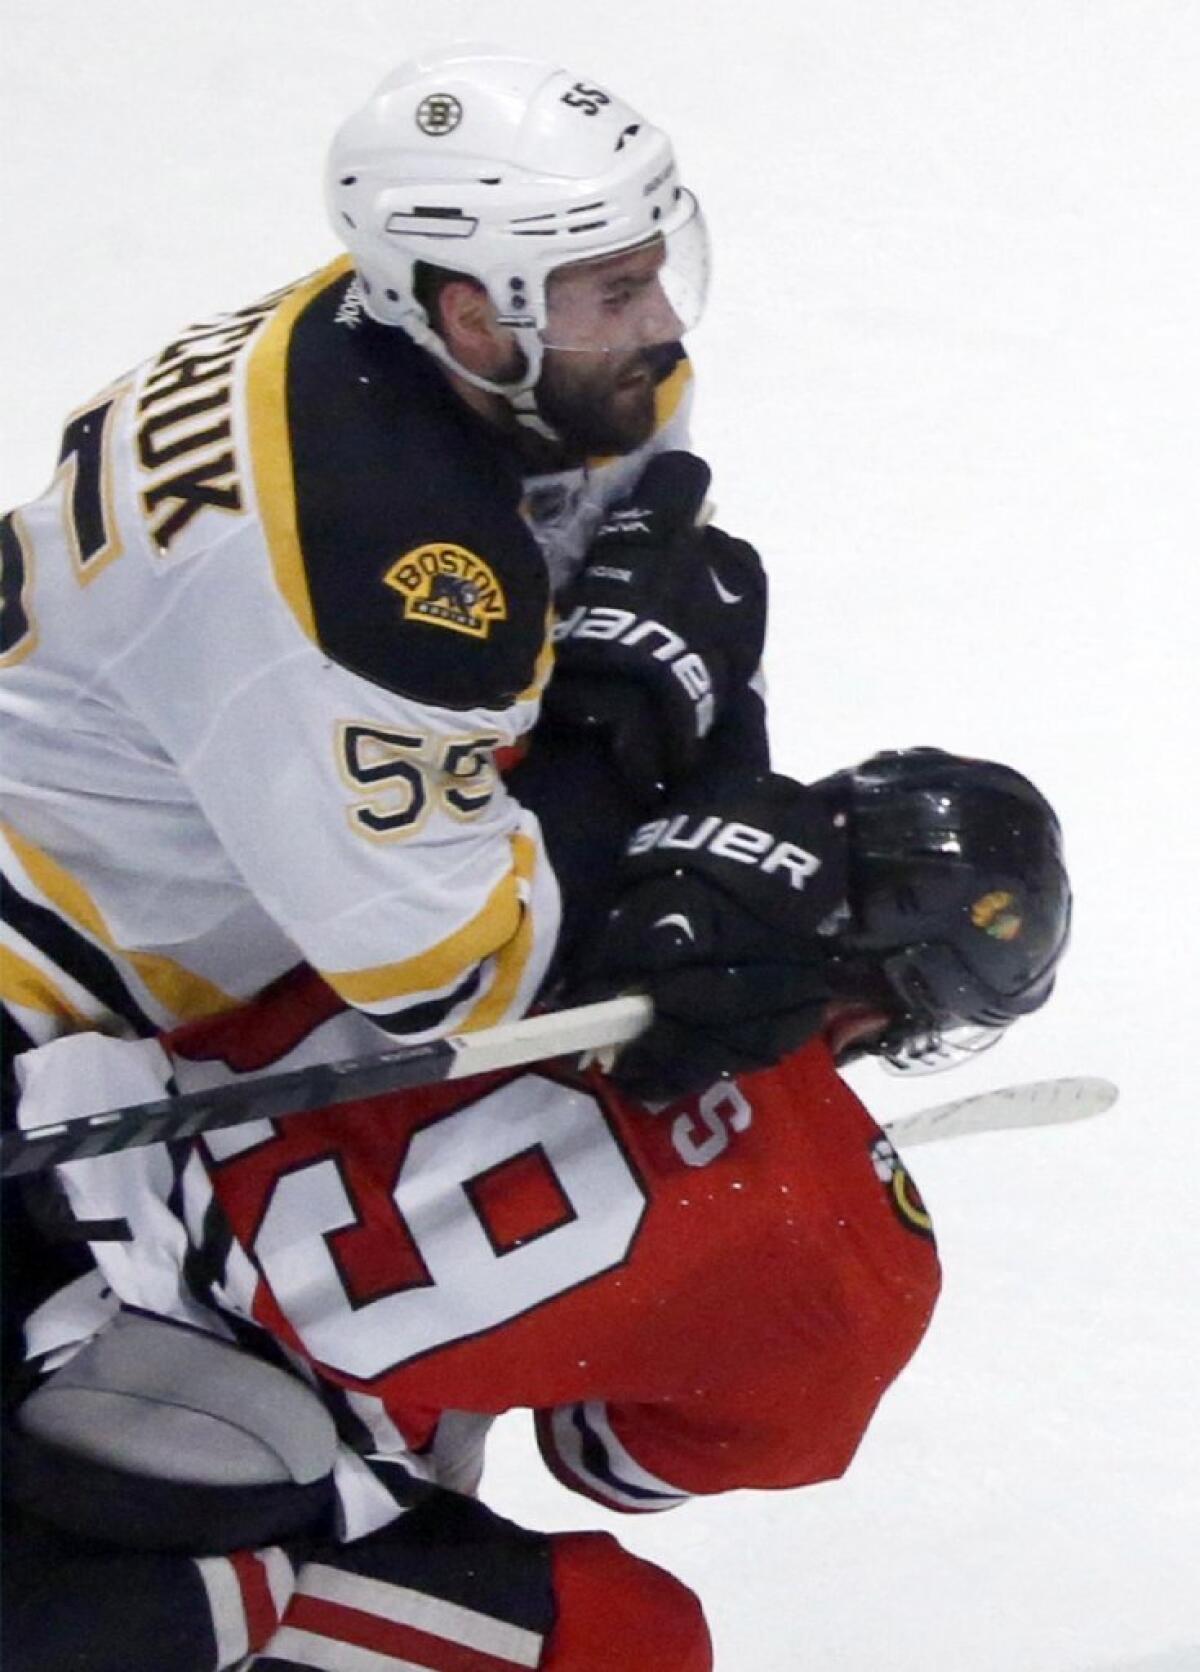 Hits to the head, such as this one from the recent NHL Finals, were outlawed prior to the 2011-12 season. Despite the ban, concussions have increased.